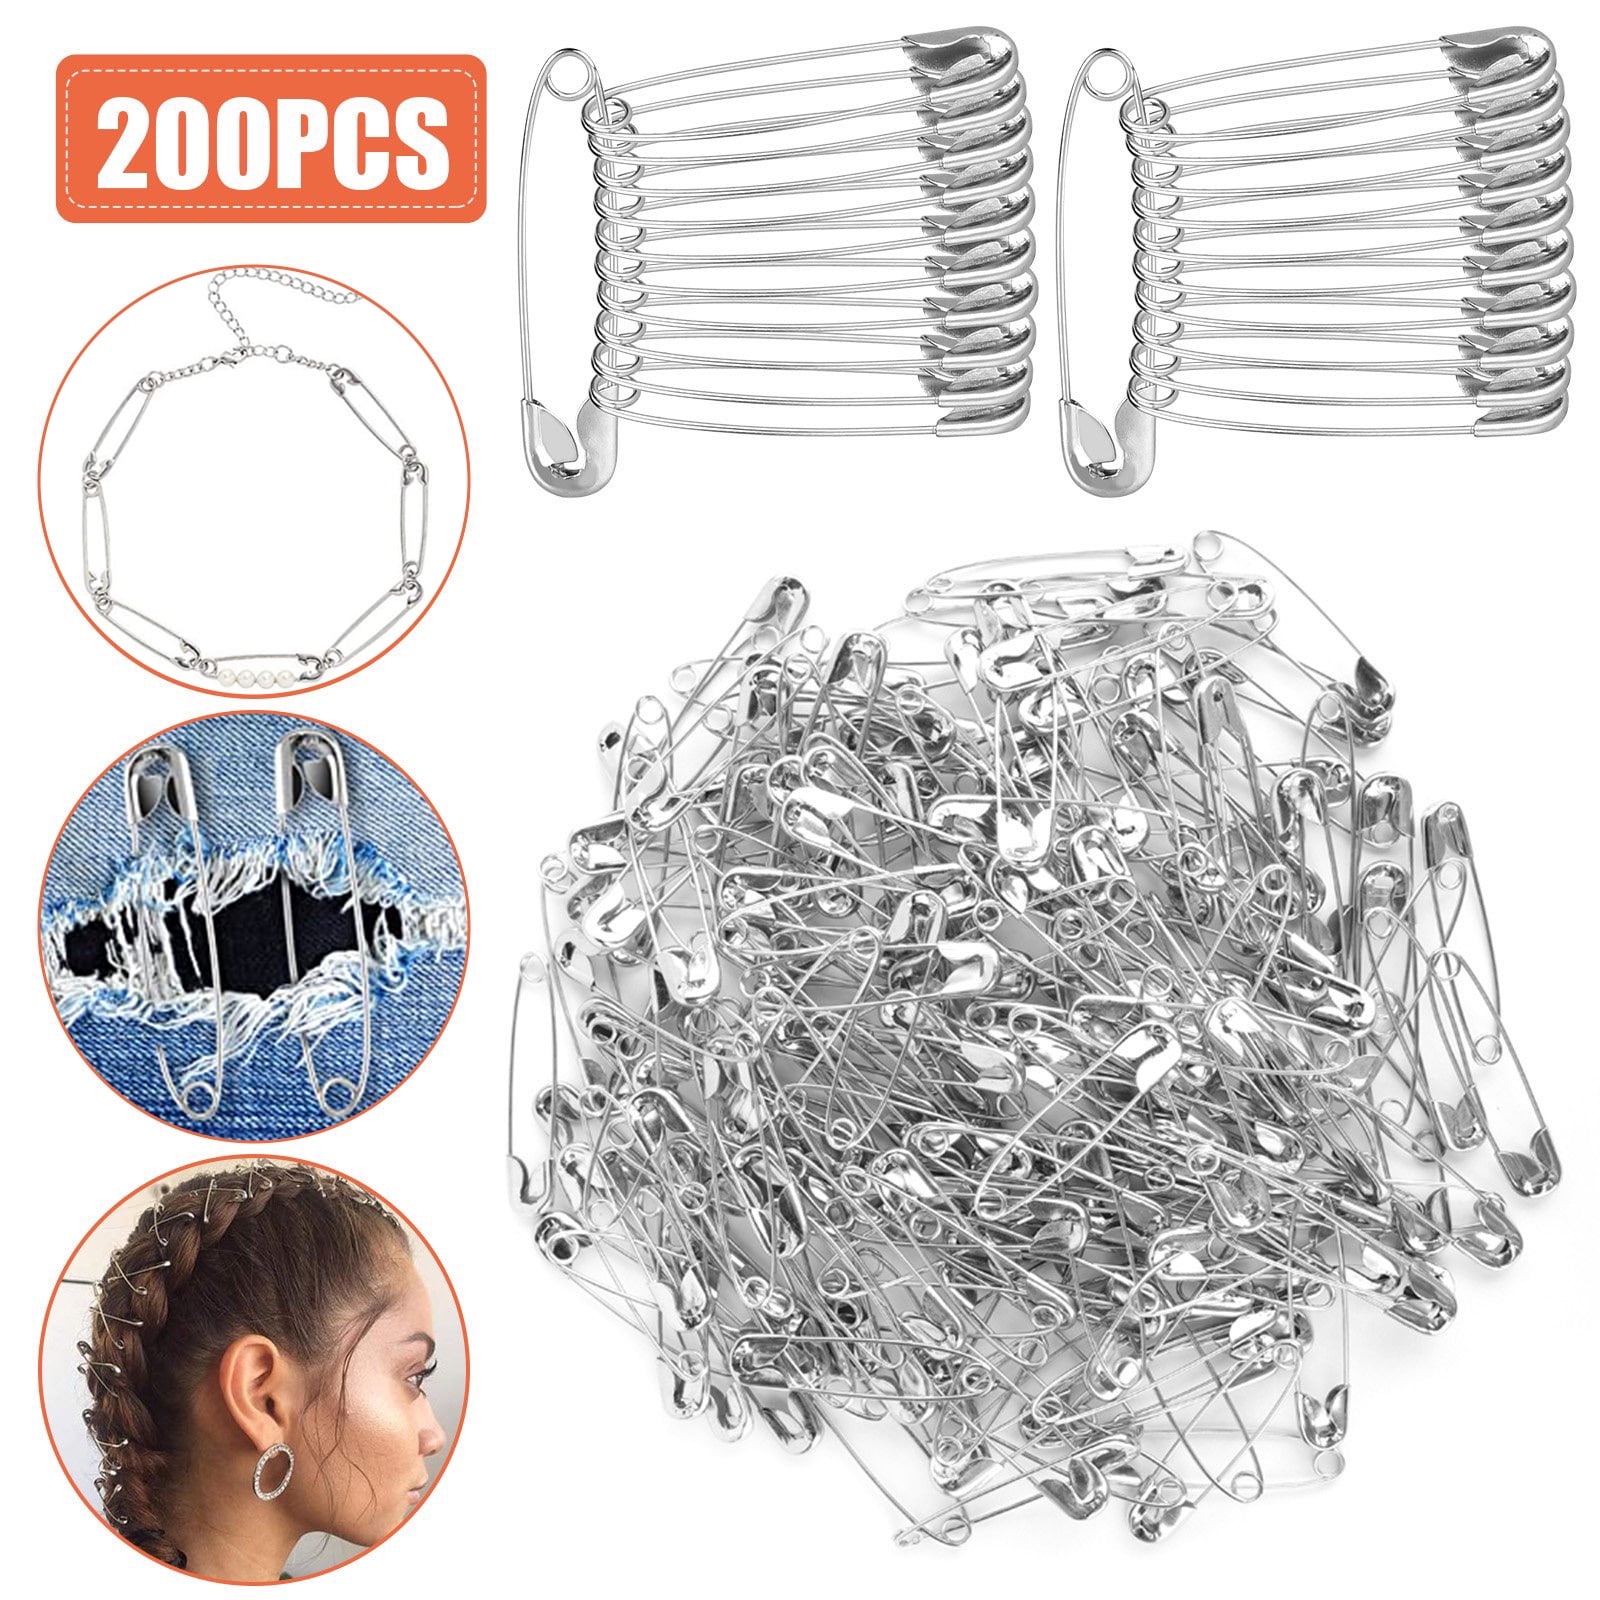 Safety Pins, Safety Pins Assorted, 20 Pack, Assorted Safety Pins, Safety Pin, Small Safety Pins, Safety Pins Bulk, Large Safety Pins, Safety Pins for